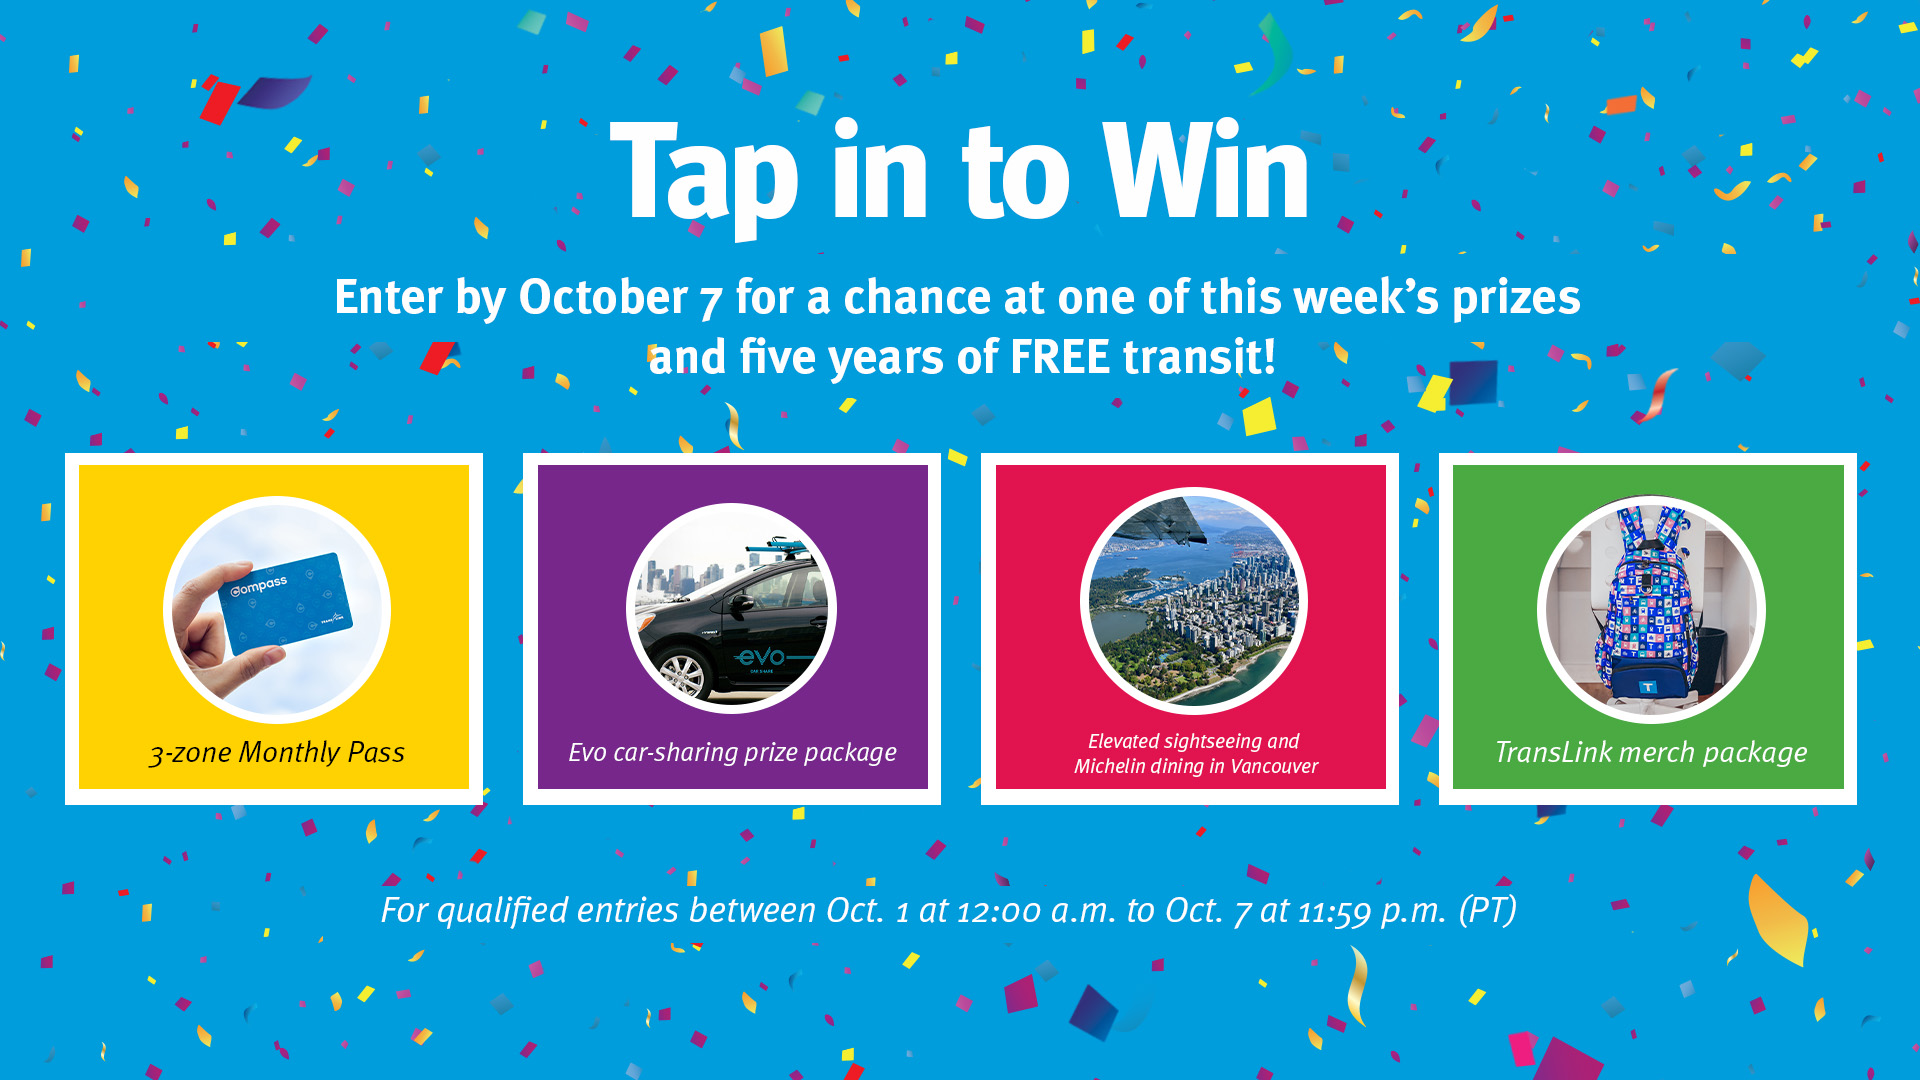 Tap in to Win week 7 prizes which includes: 3-zone Compass Monthly Pass, Evo car-sharing prize package, a Stay and Play package, and TransLink merchandise.